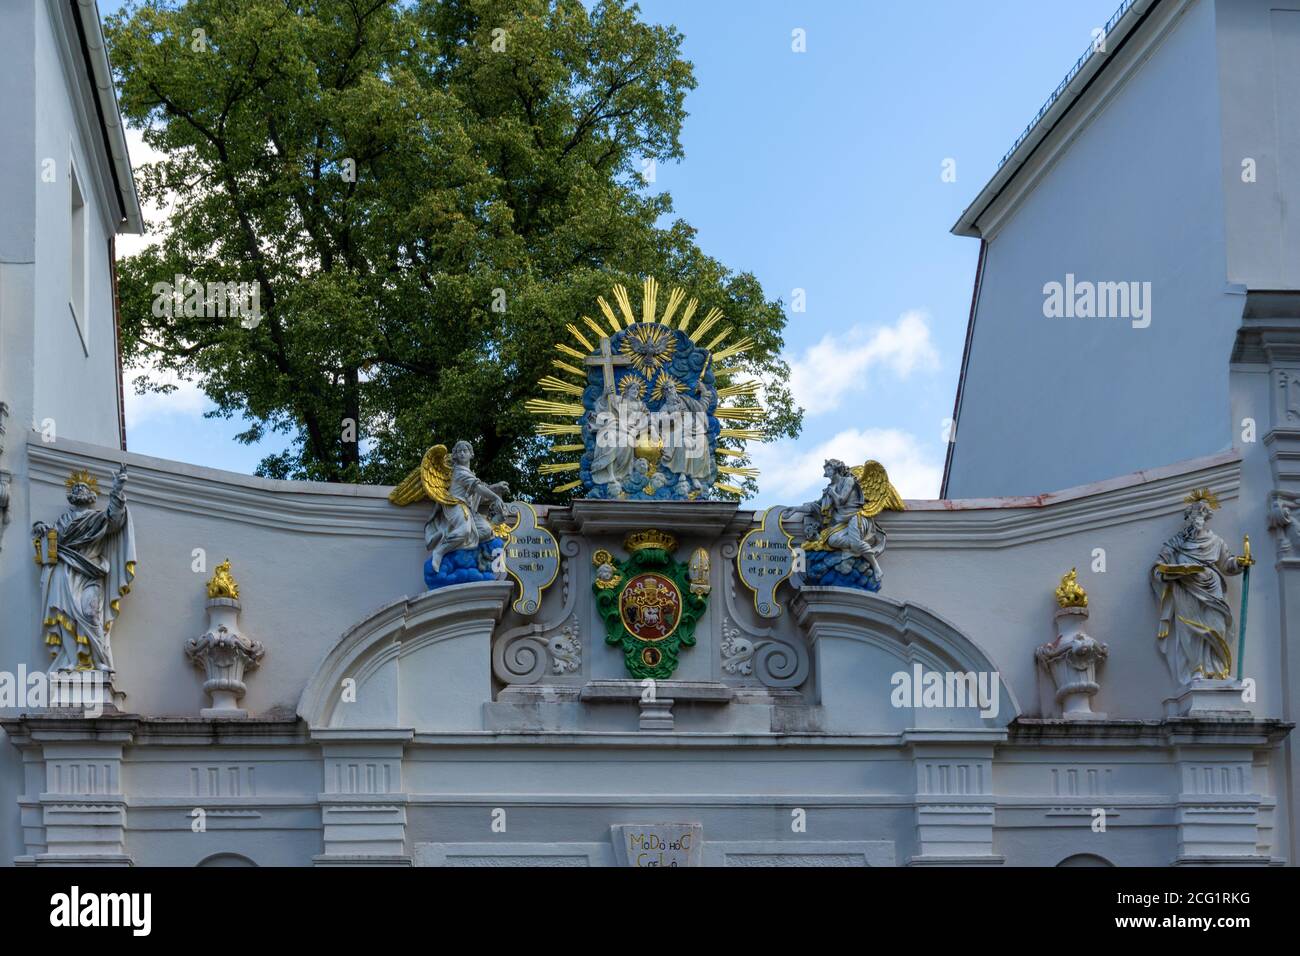 Bautzen, Saxony / Germany - 7 September 2020: view of the historic catehdral chapter gate in Bautzen Stock Photo